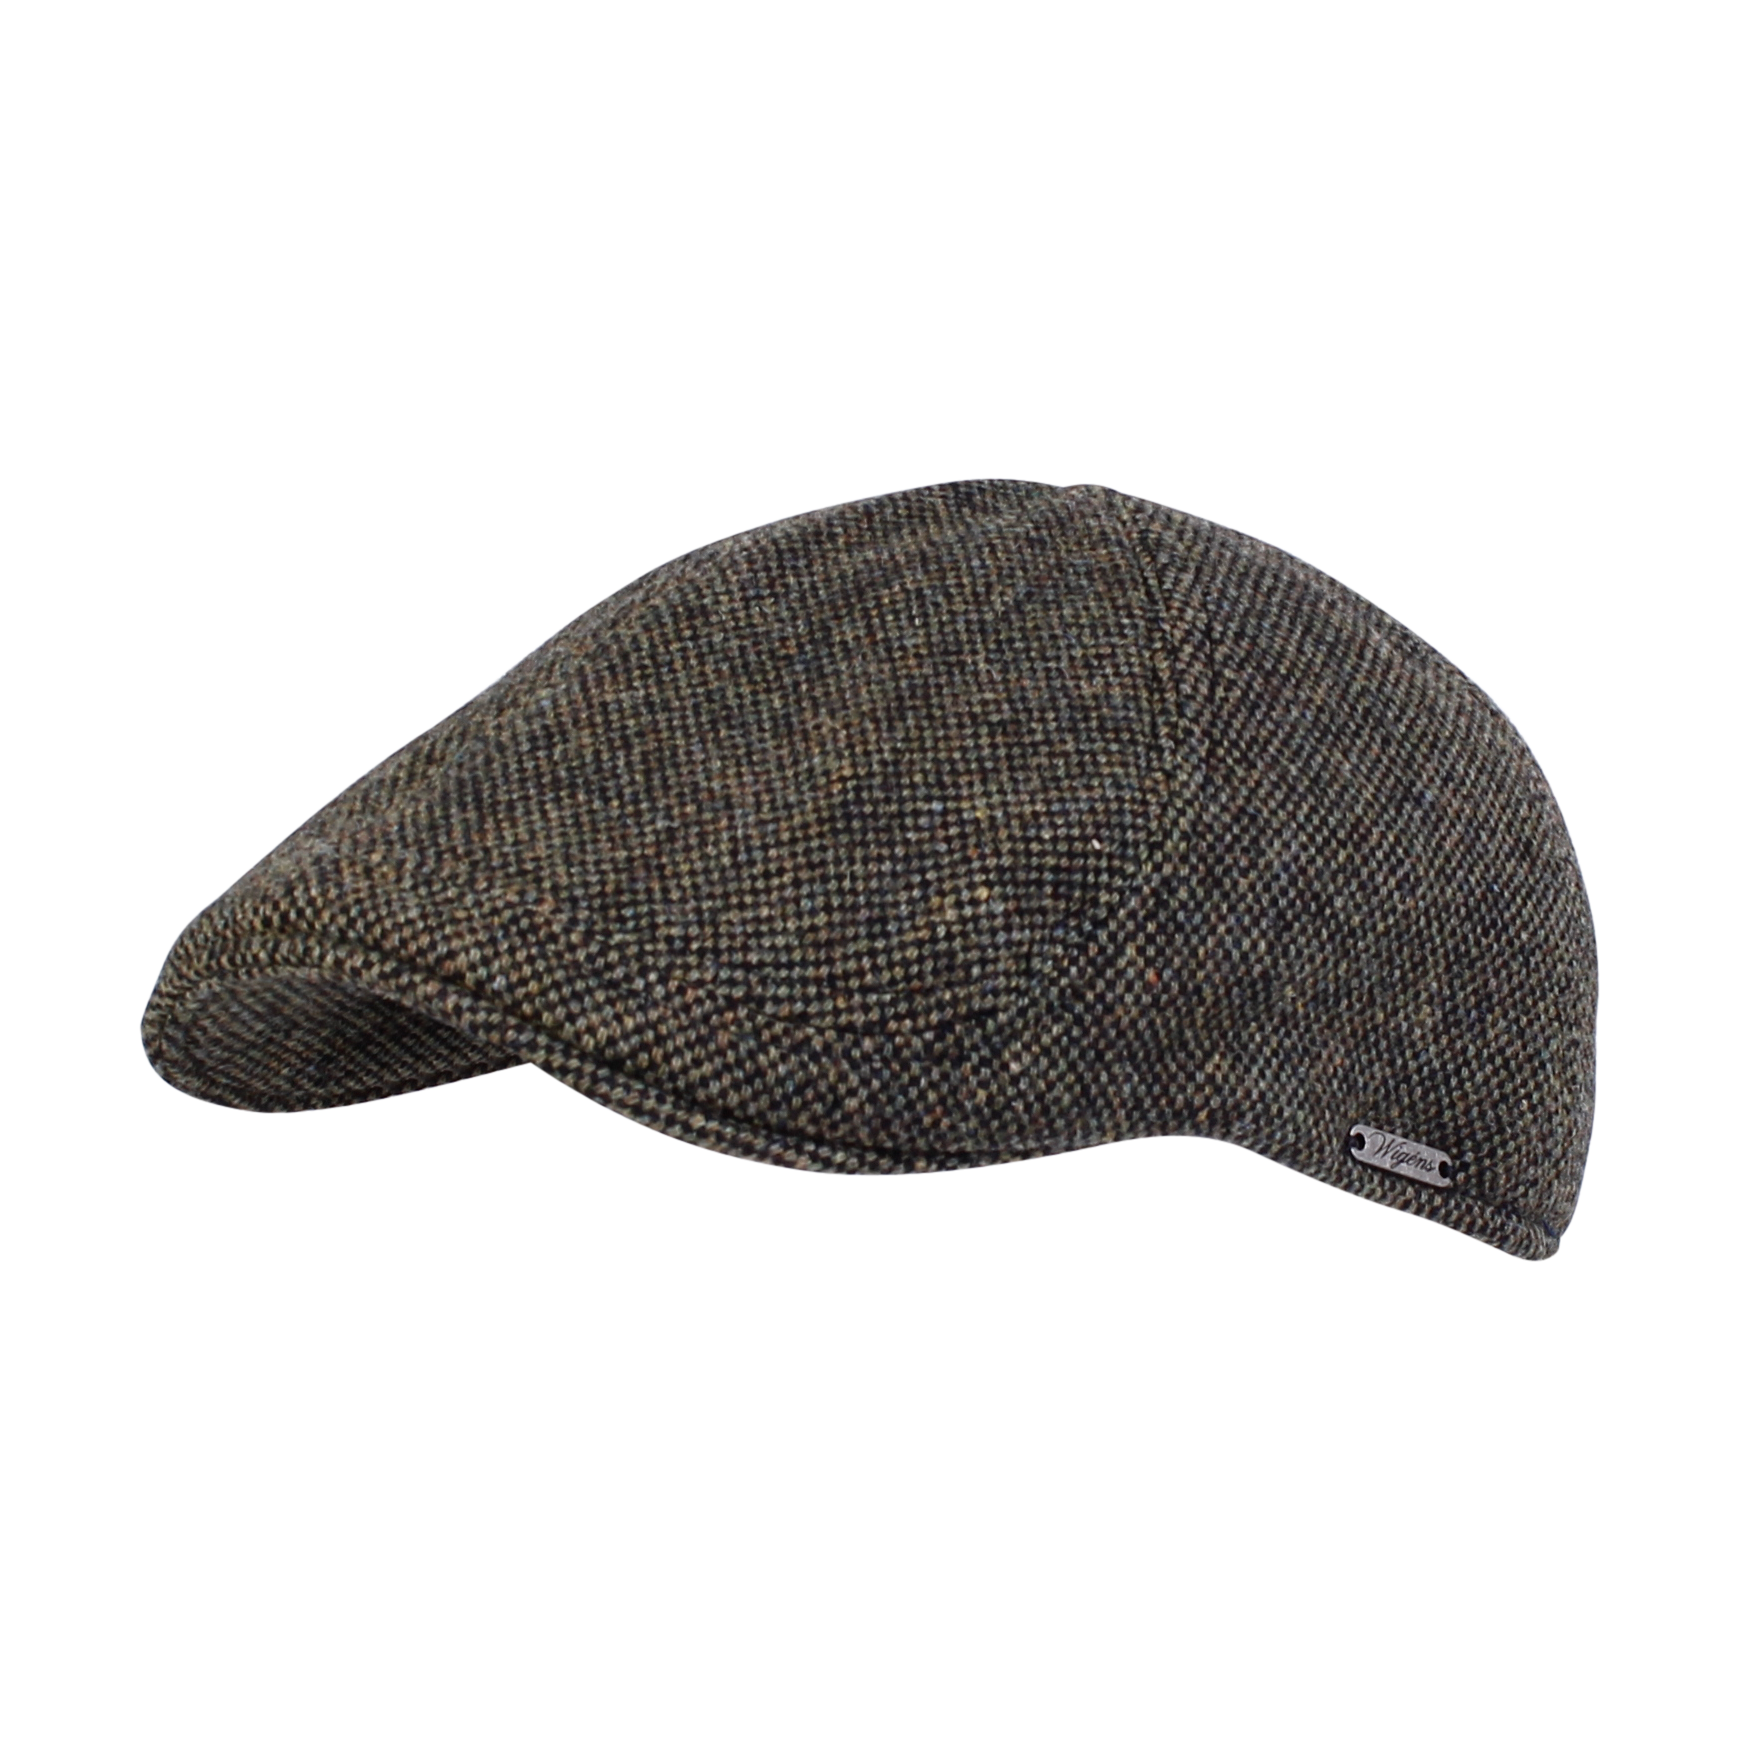 Pub Cap in Shetland Wool Donegal (Choice of Colors) by Wigens